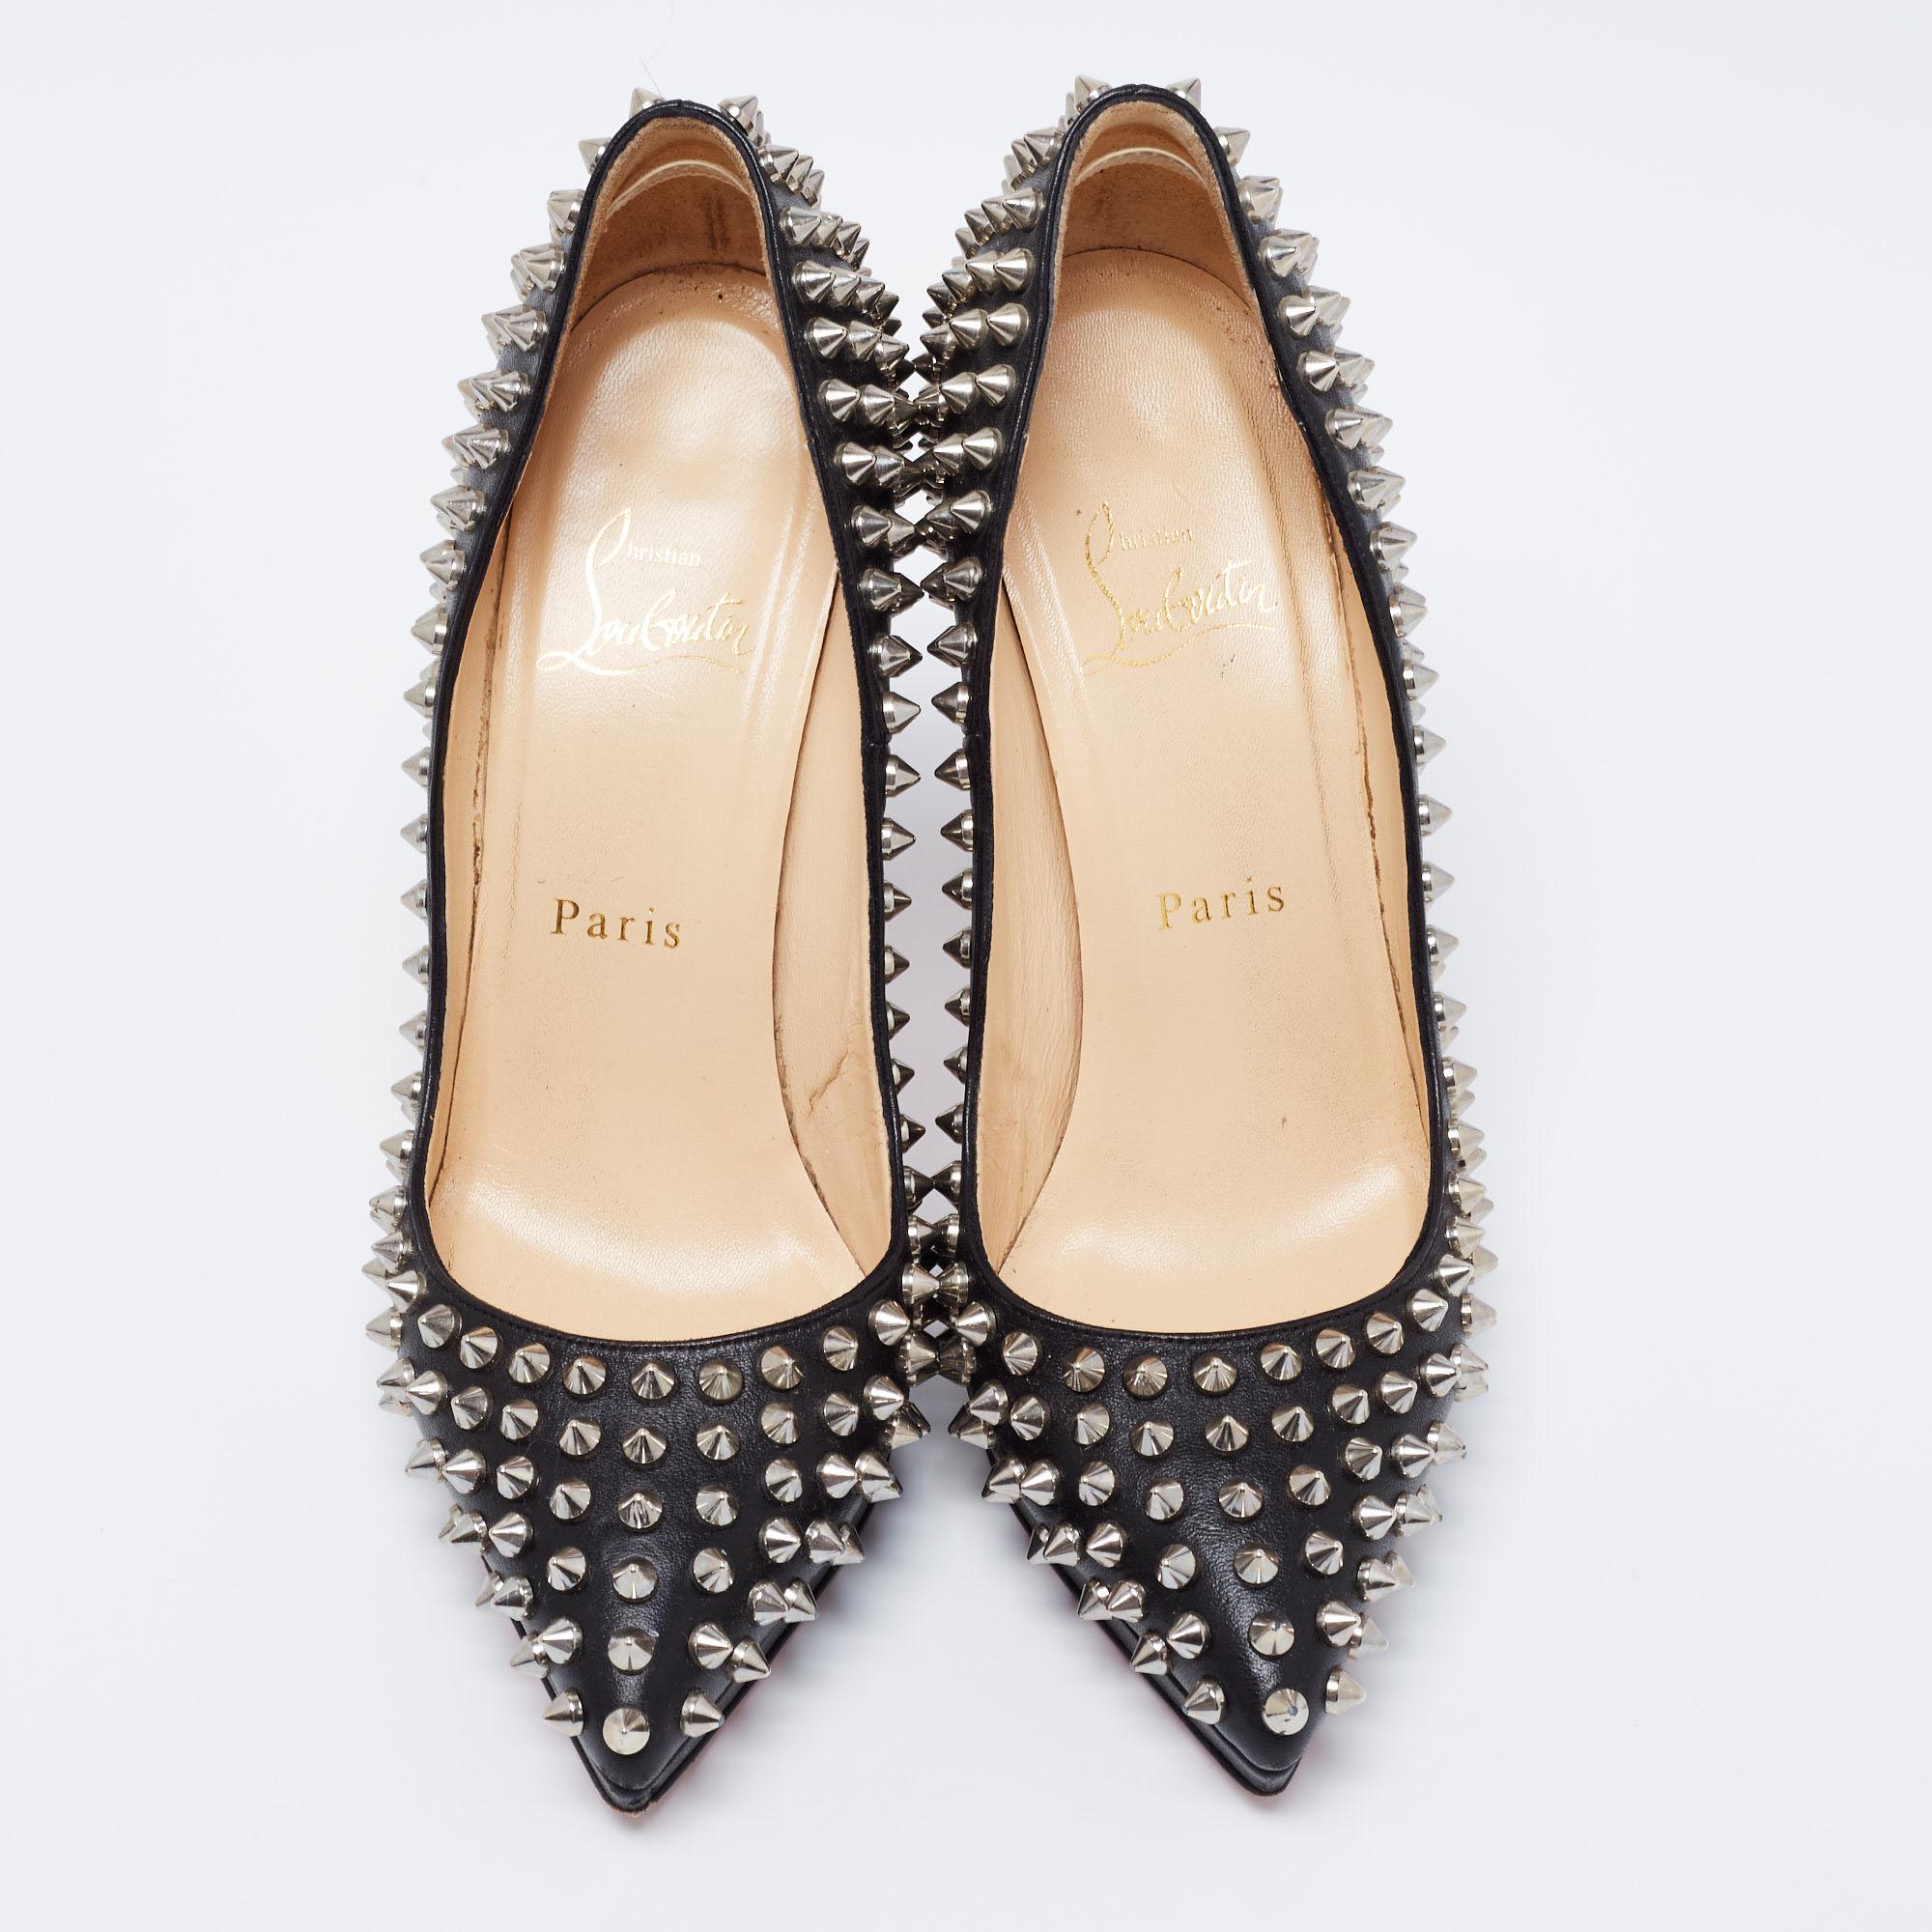 The House of Christian Louboutin accomplishes itself as an iconic label that curates boldly feminine and upscale pieces. These Pigalle Spikes pumps exhibit a remarkable shape that begins with a slightly pointed toe and ends with a sharply formed